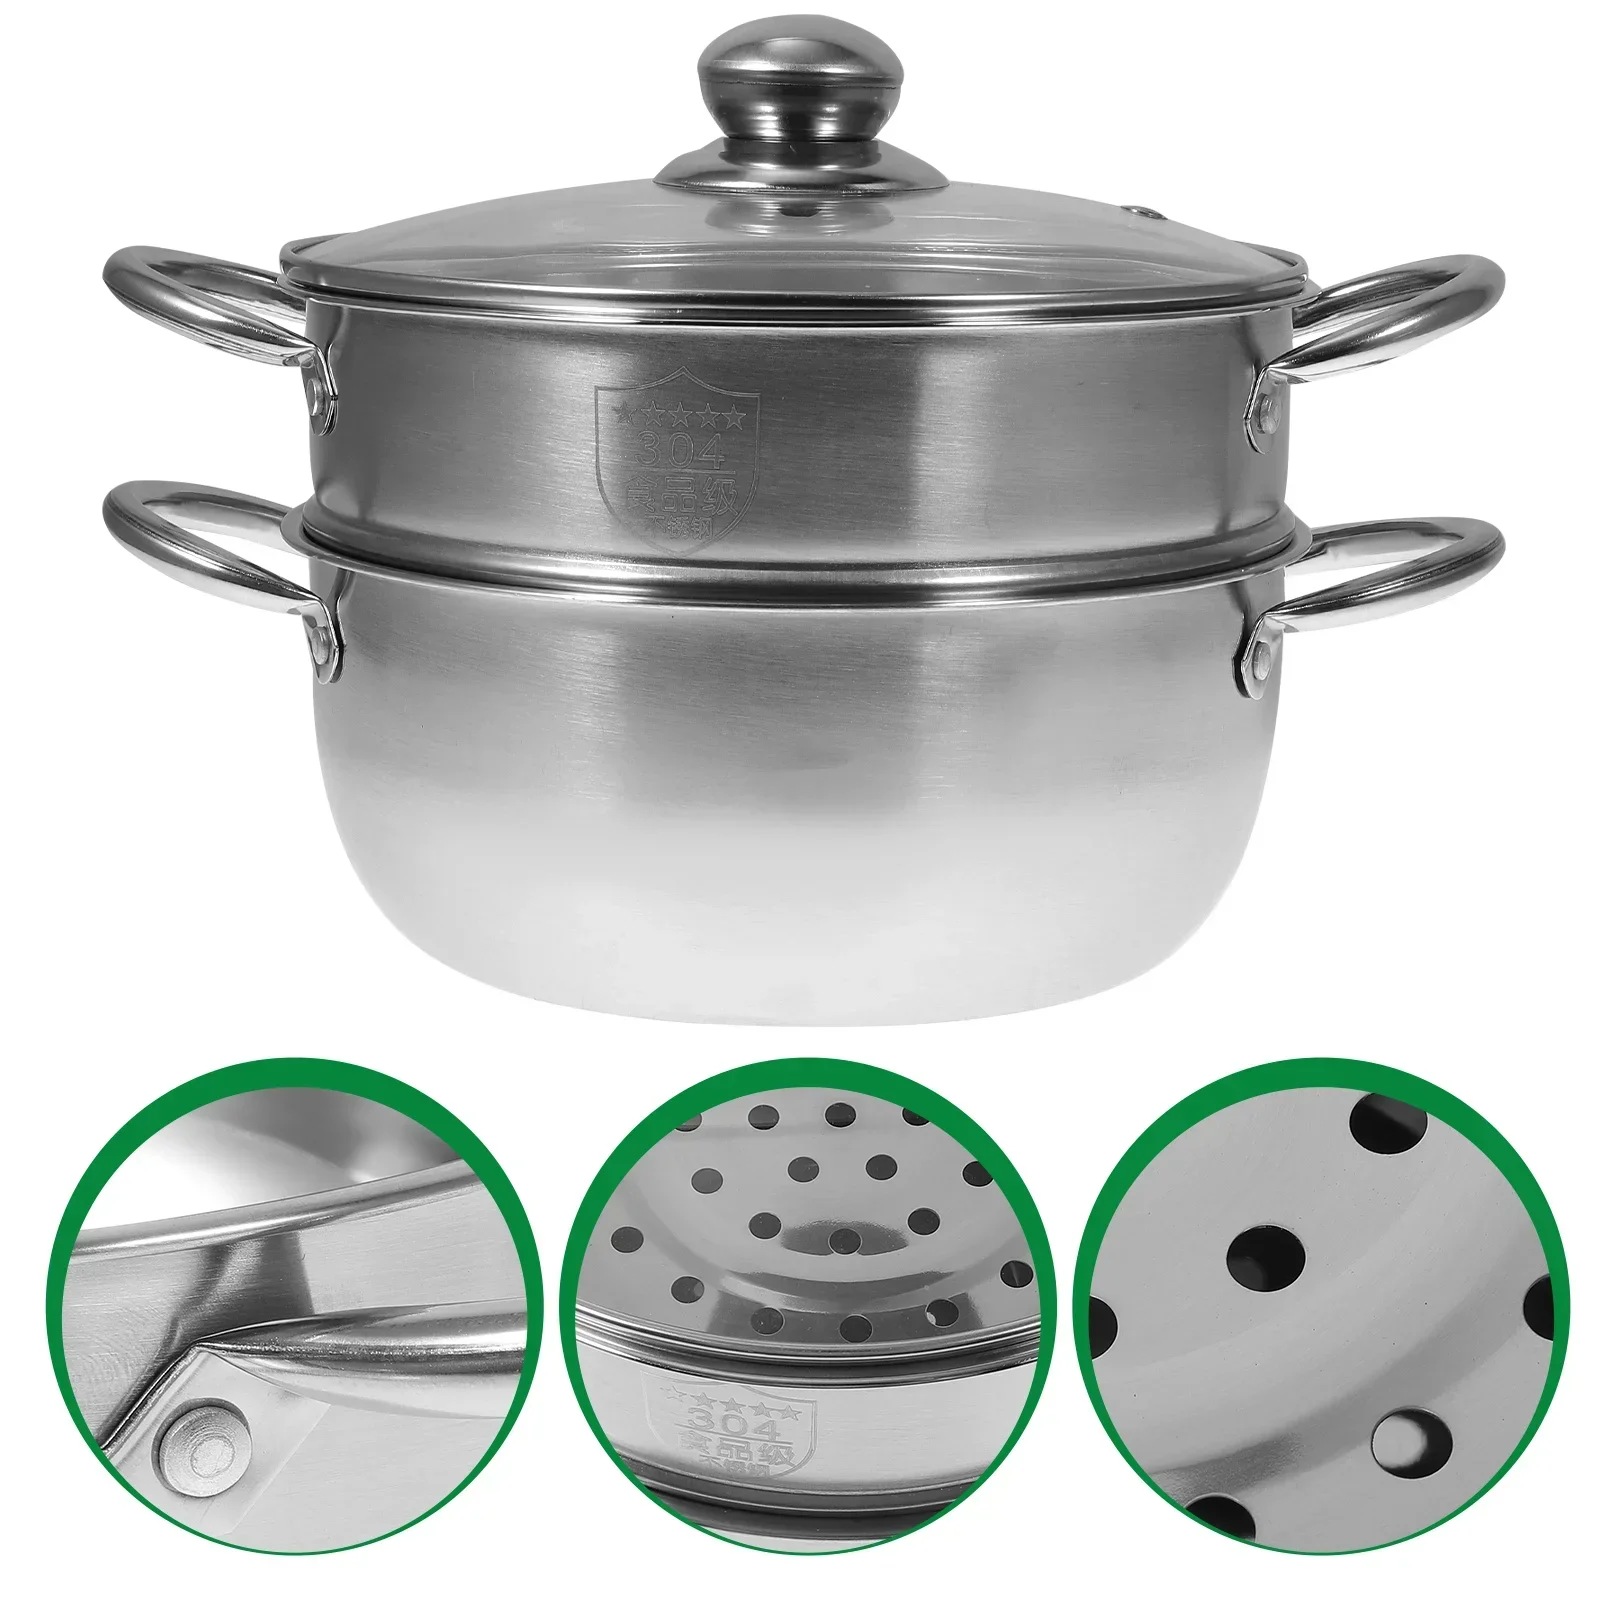 

Steam Vegetable Cooker Seafood Stock Cooking Soup Steaming Stainless Kitchen Pots Cookware Induction Pot Steamer Stockpot Steel